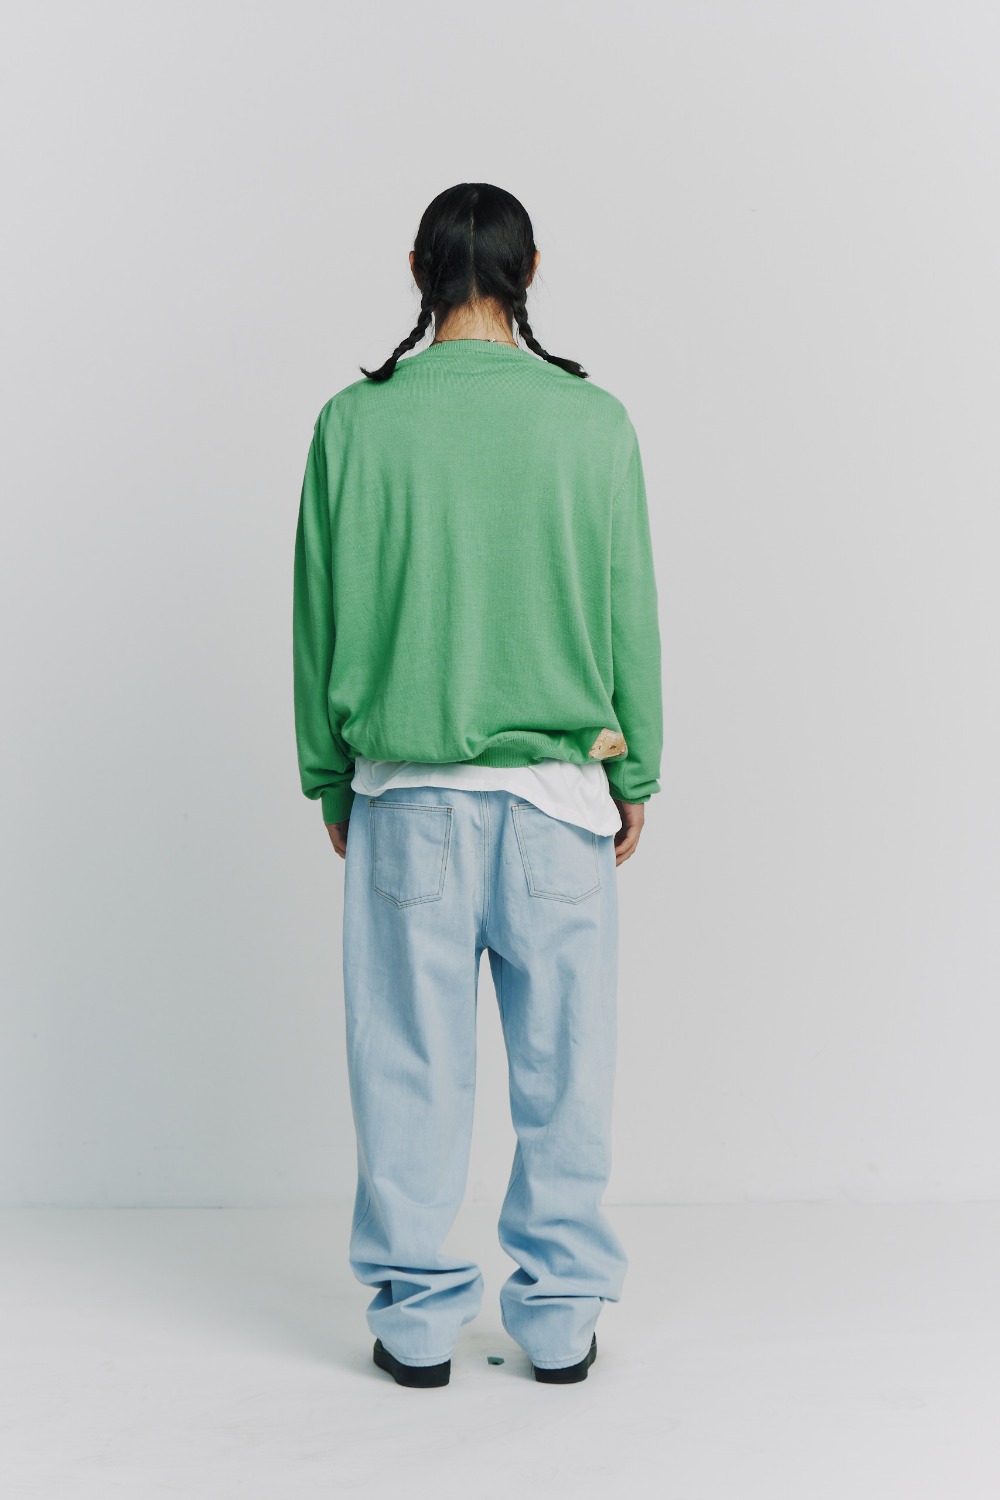 MPa LOOSE FIT SWEATER (GREEN)